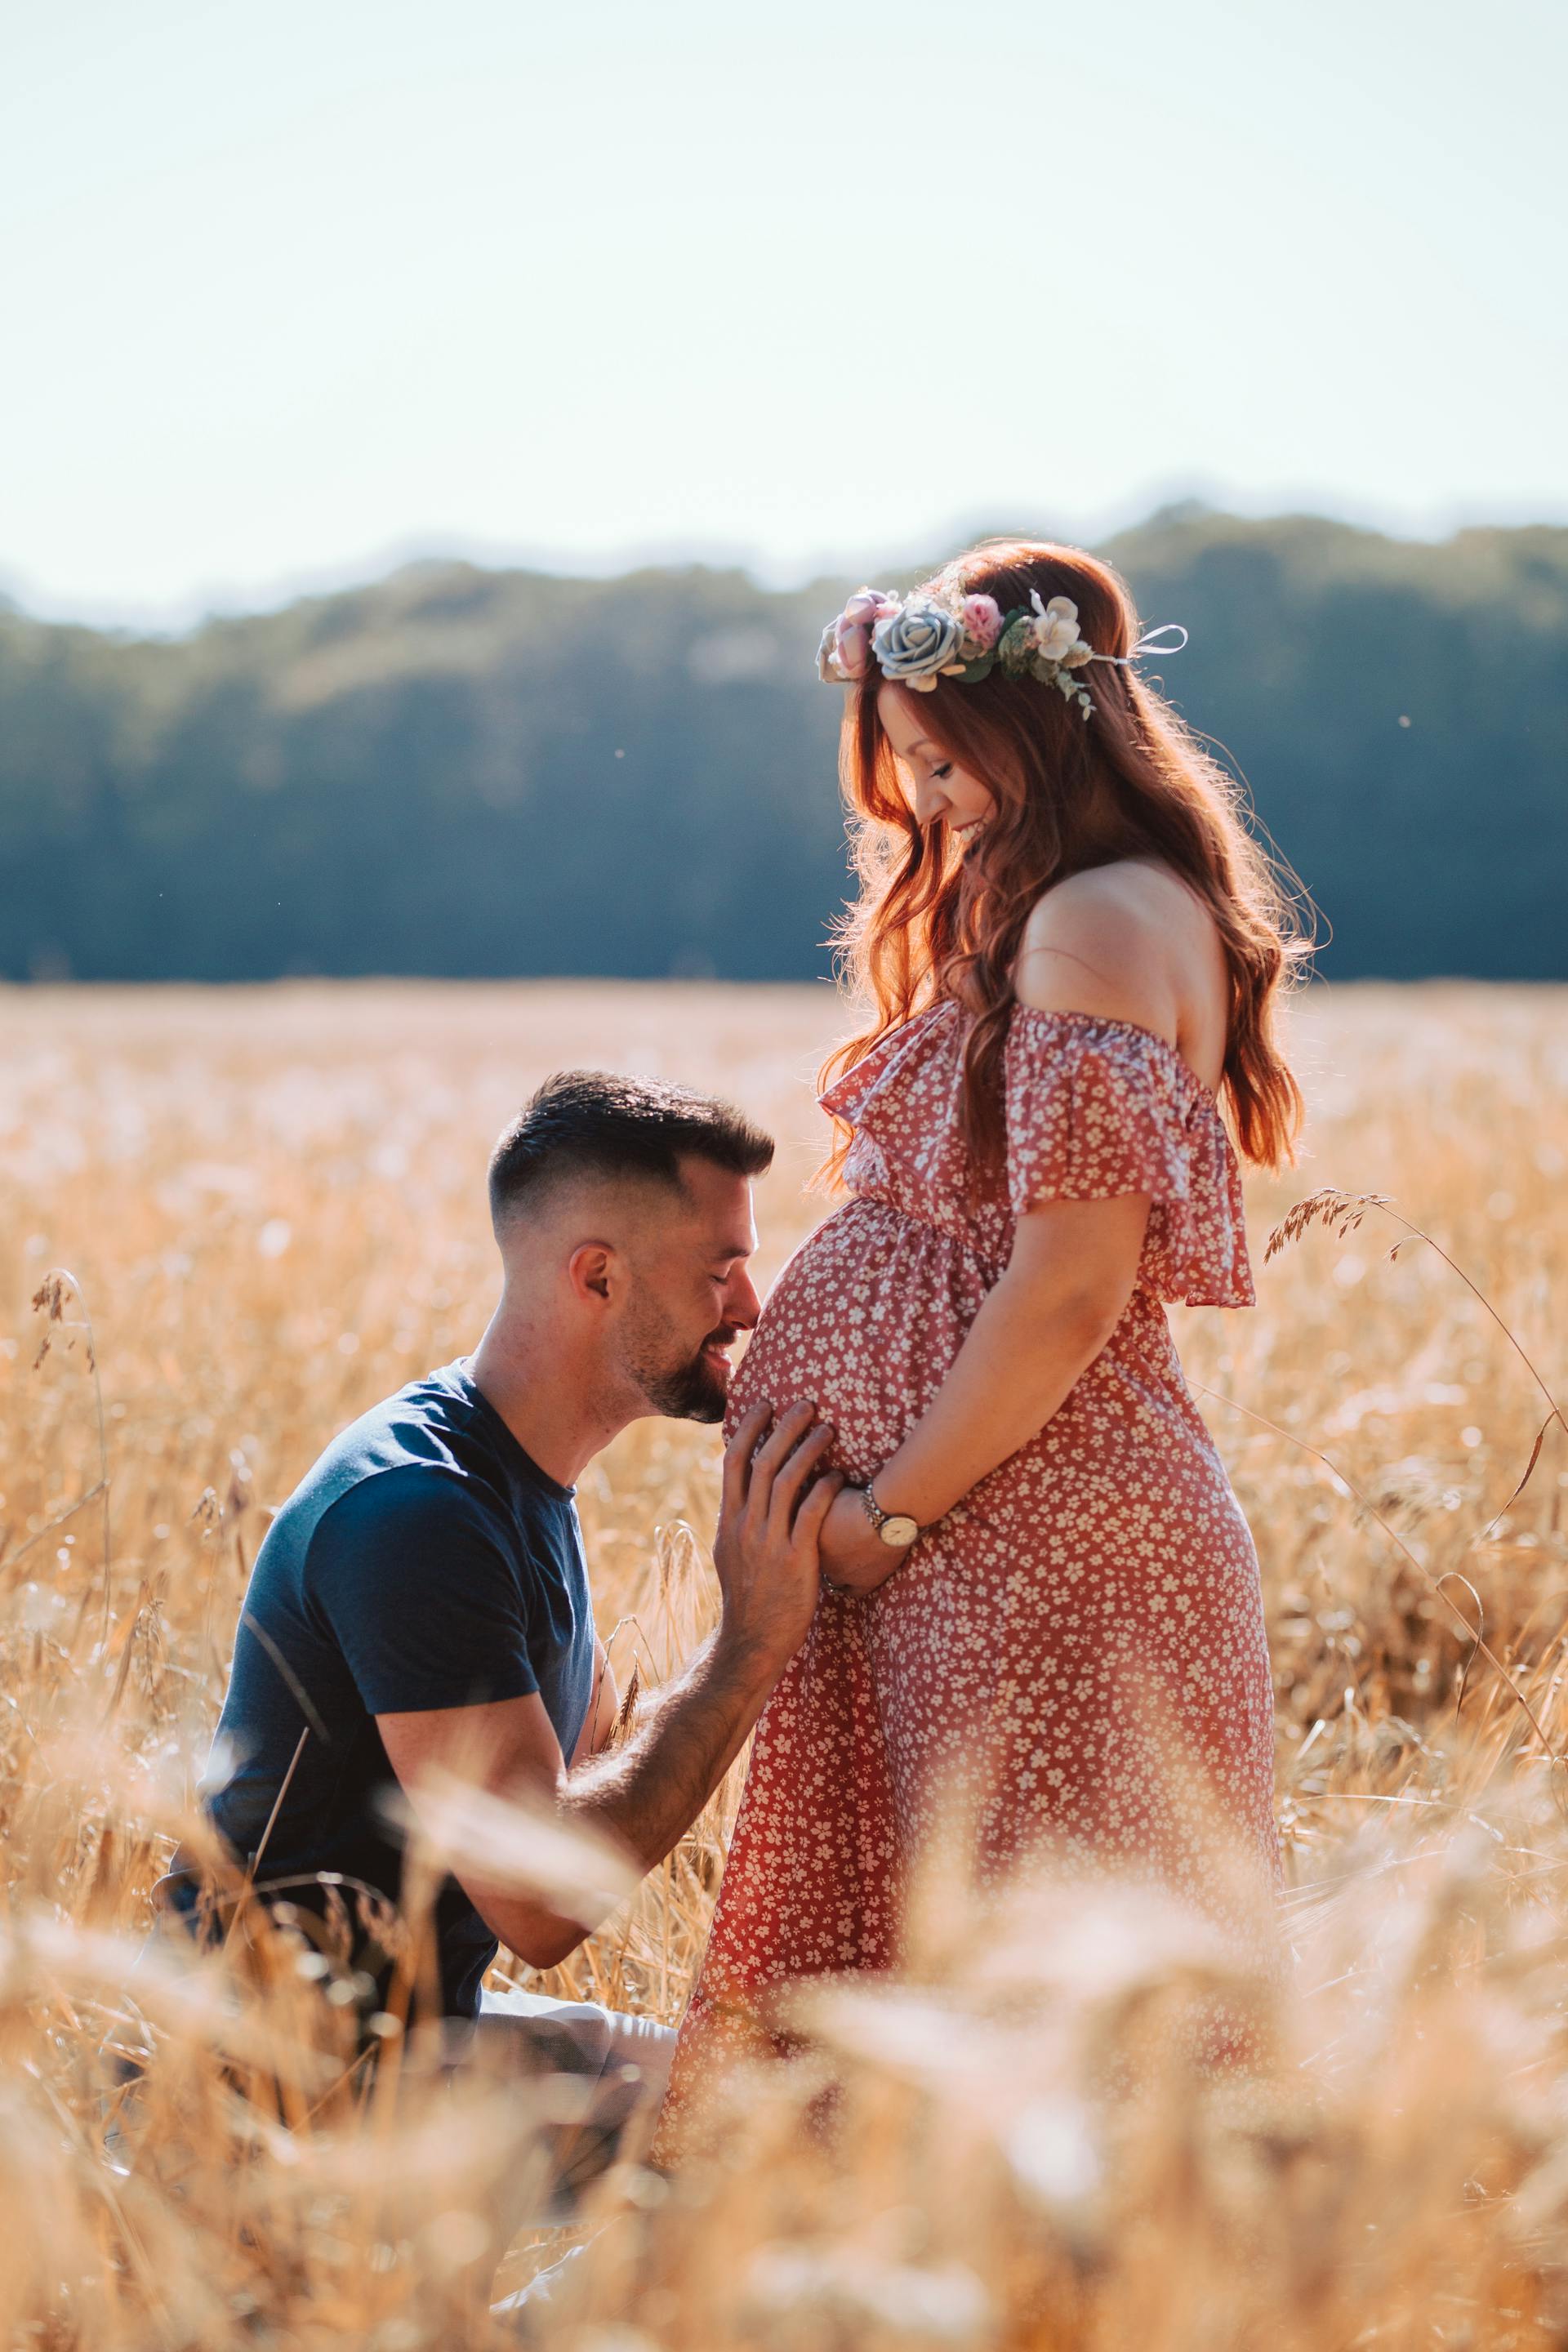 A man kissing his pregnant wife's baby bump | Source: Pexels